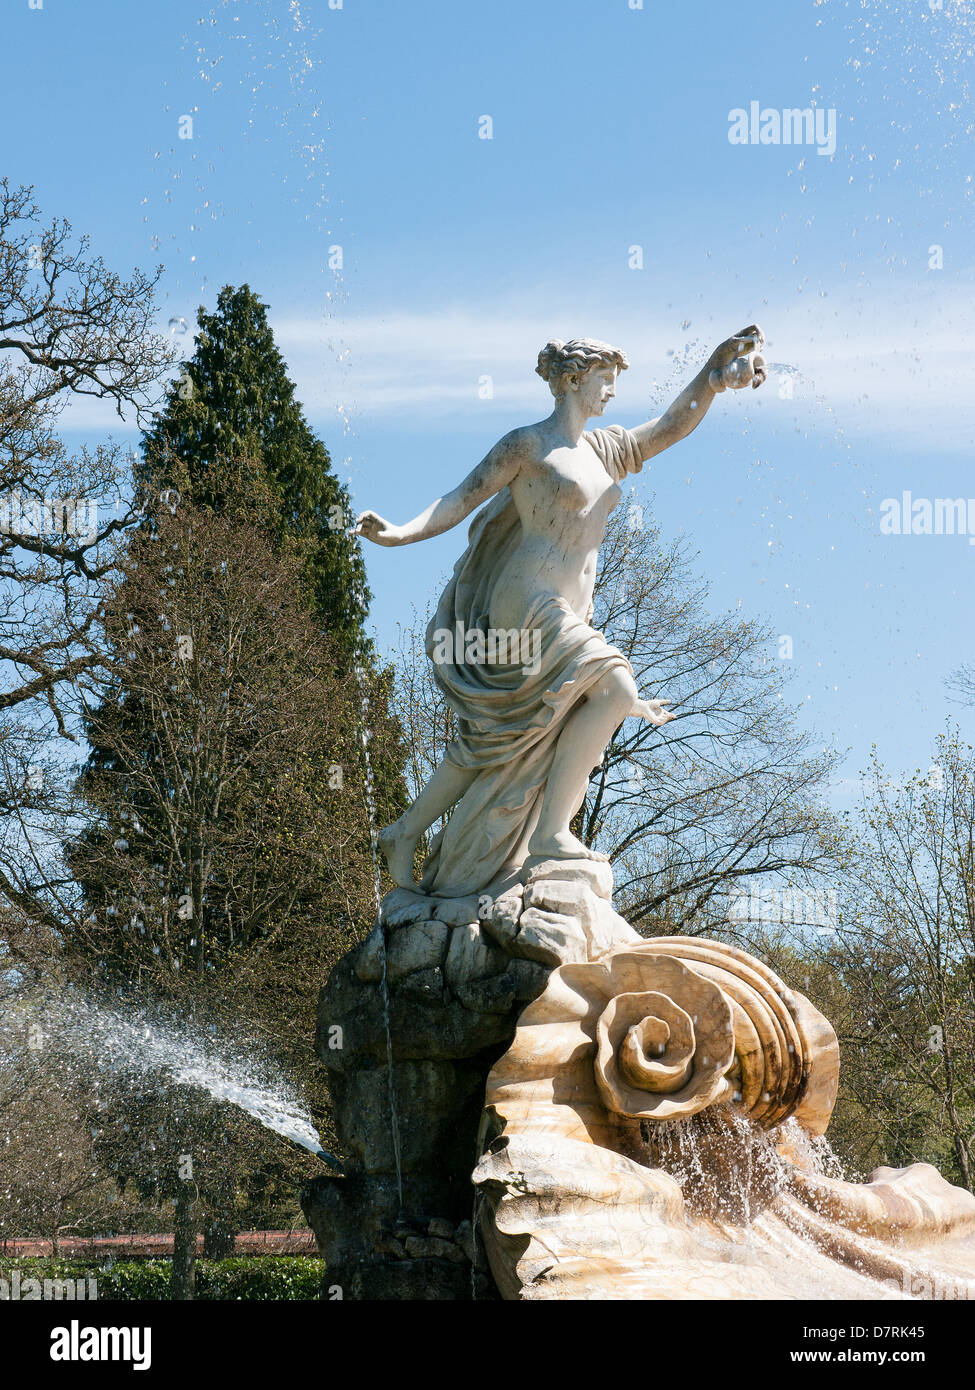 Stature at 'The Fountain of Love' on the Grand Avenue at Cliveden, by Thomas Waldo Story ( 1855-1915)  Bucks, UK Stock Photo